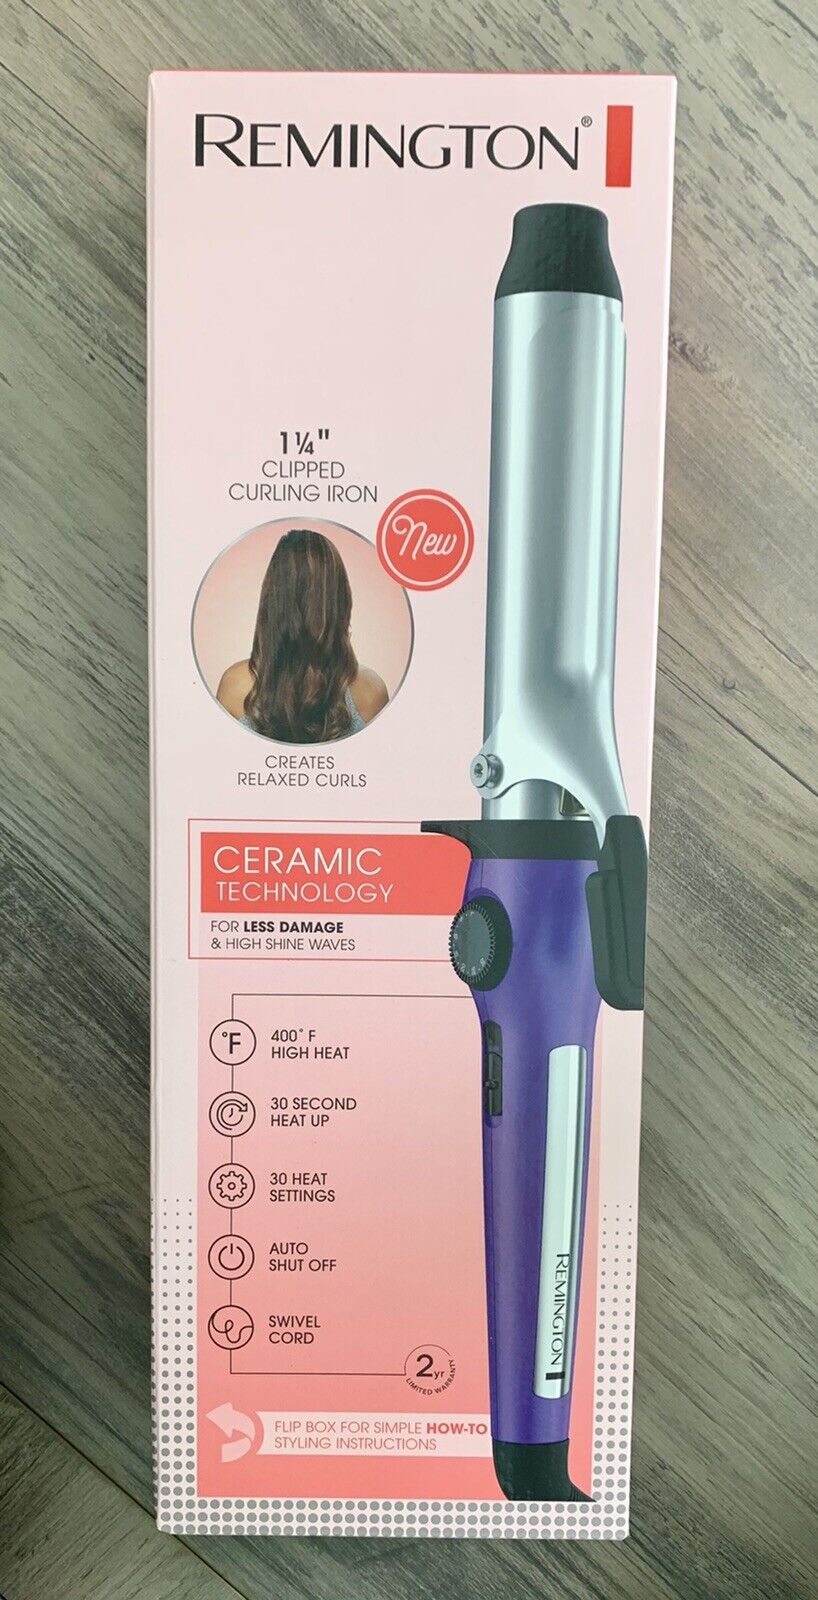 Remington 1 1/4" Ceramic Clipped Curling Iron Purple CI5032 NEW Relaxed Curls